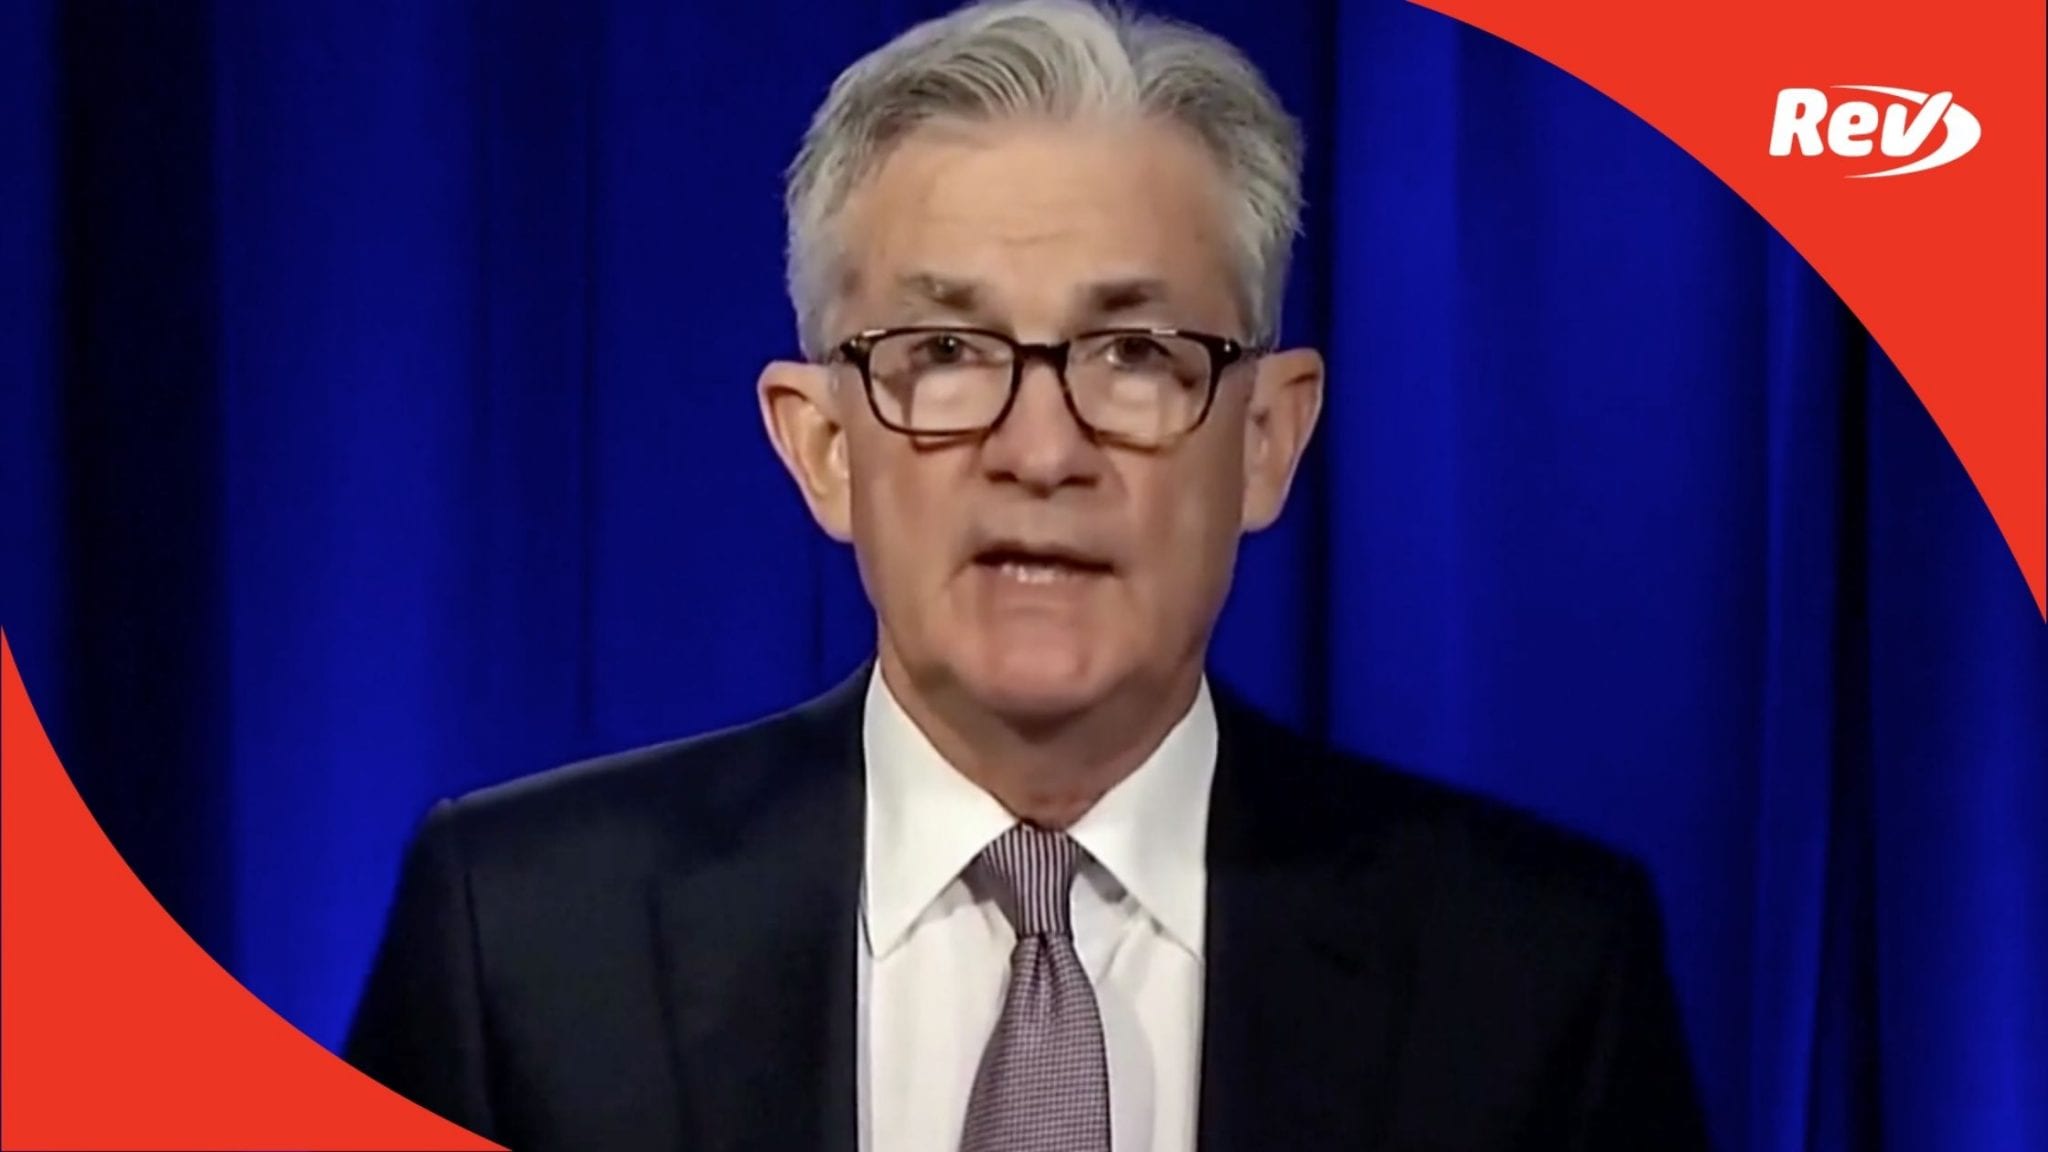 Jerome Powell Remarks on Economy After Trump Contracts COVID-19 Transcript October 6